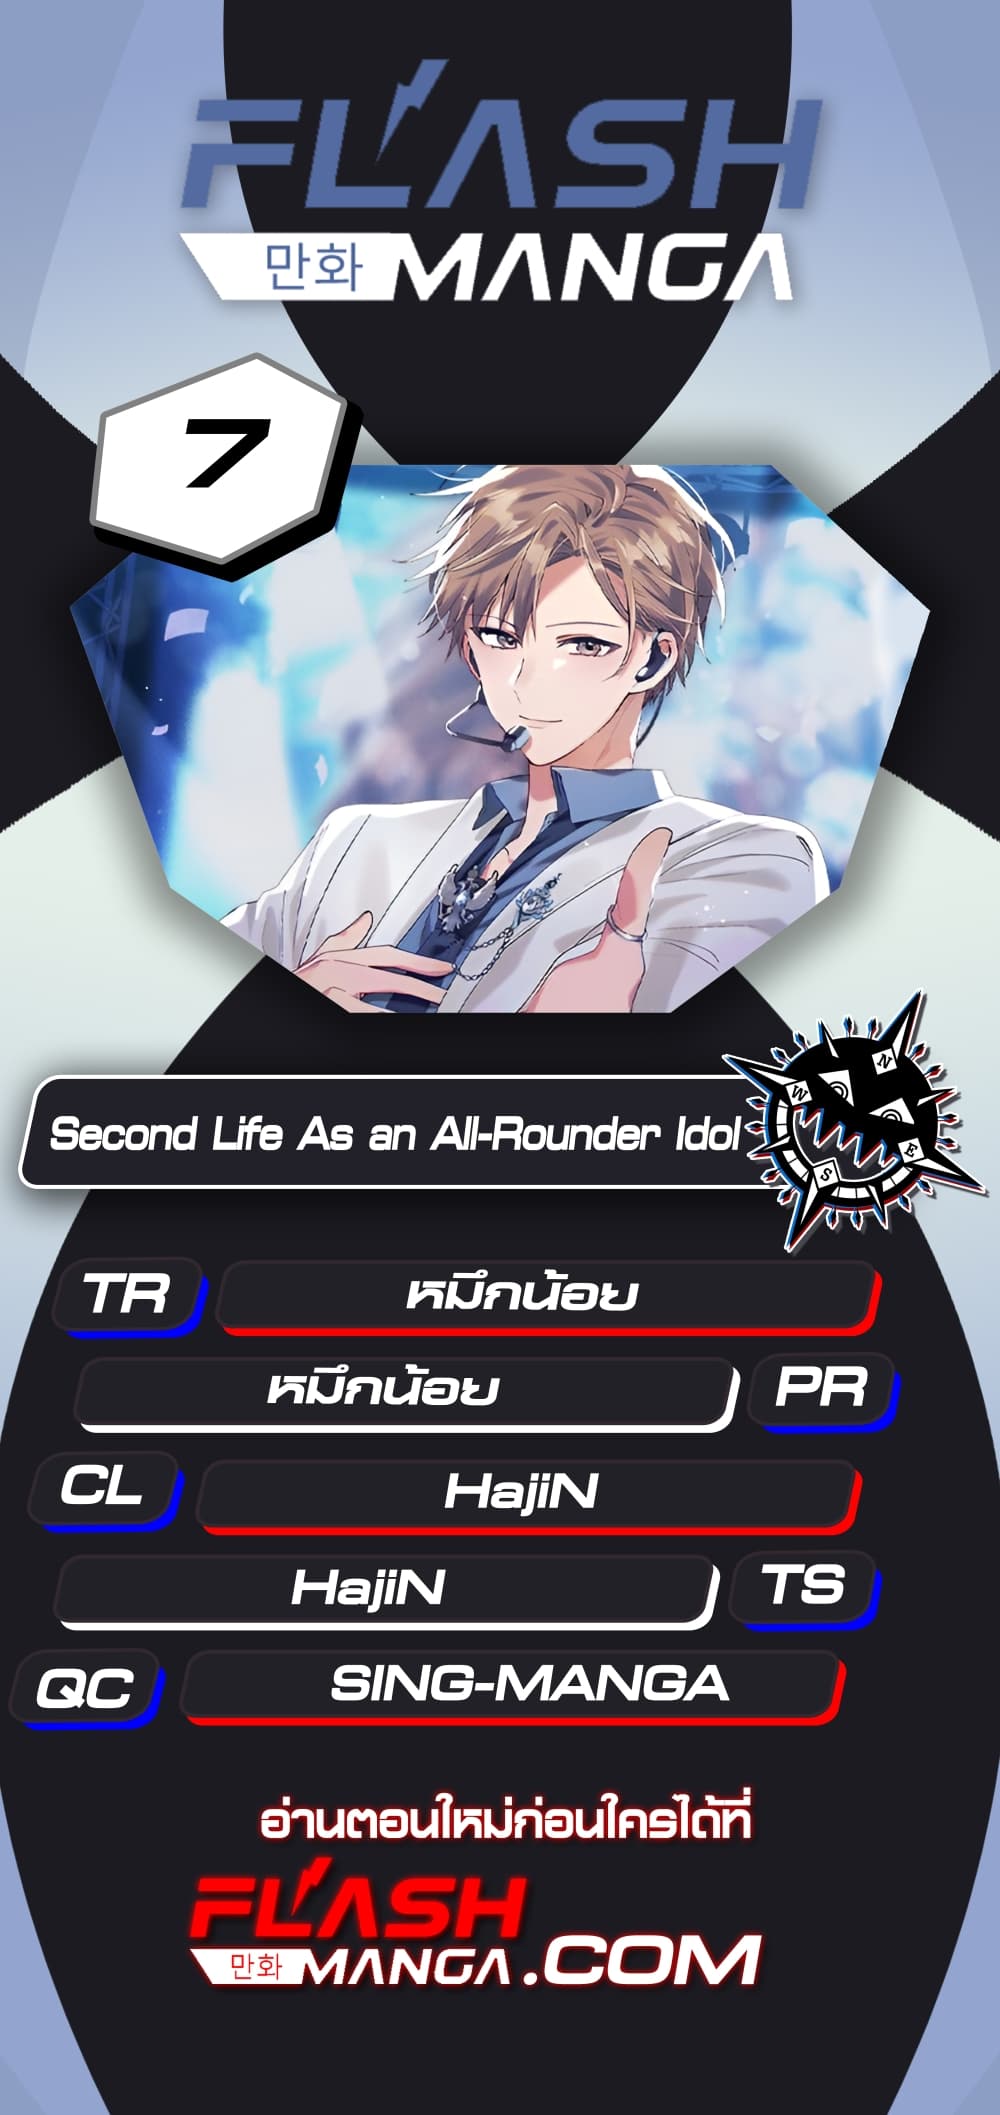 The Second Life of an All-Rounder Idol 7-7